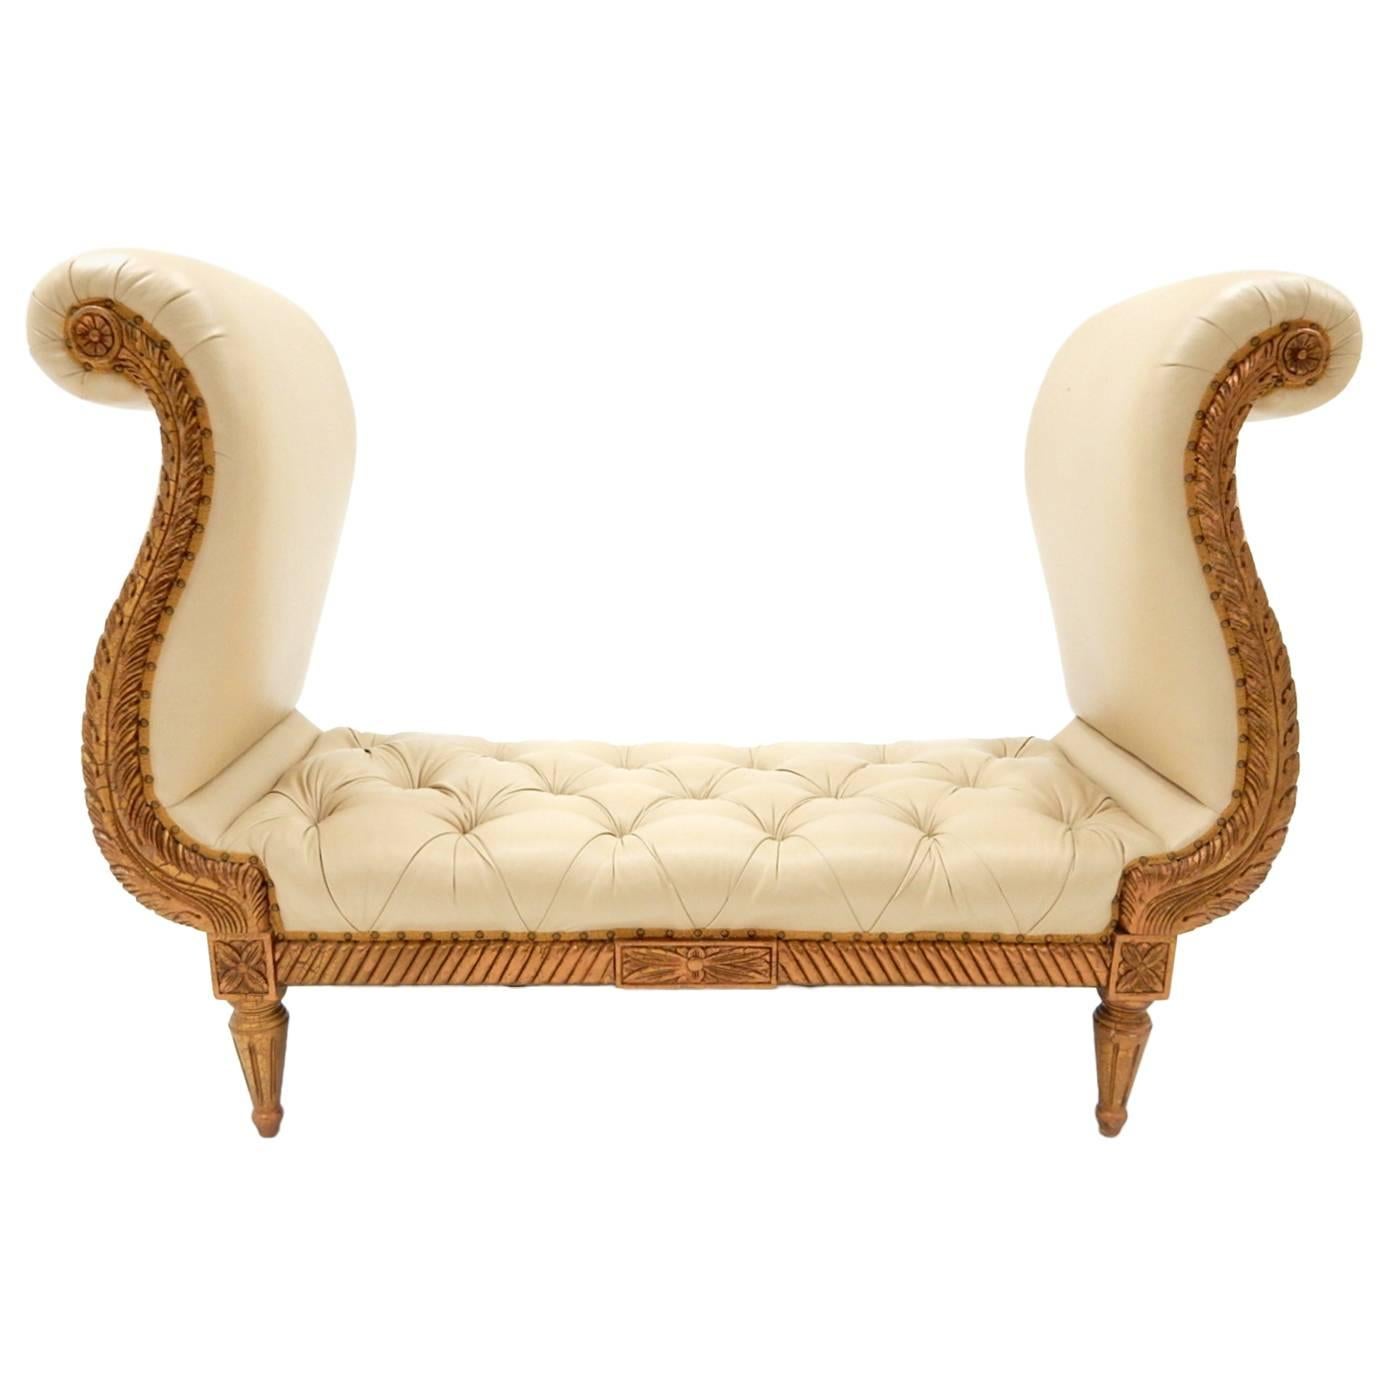 Neoclassical Venetian Tufted Leather Sofa Bench